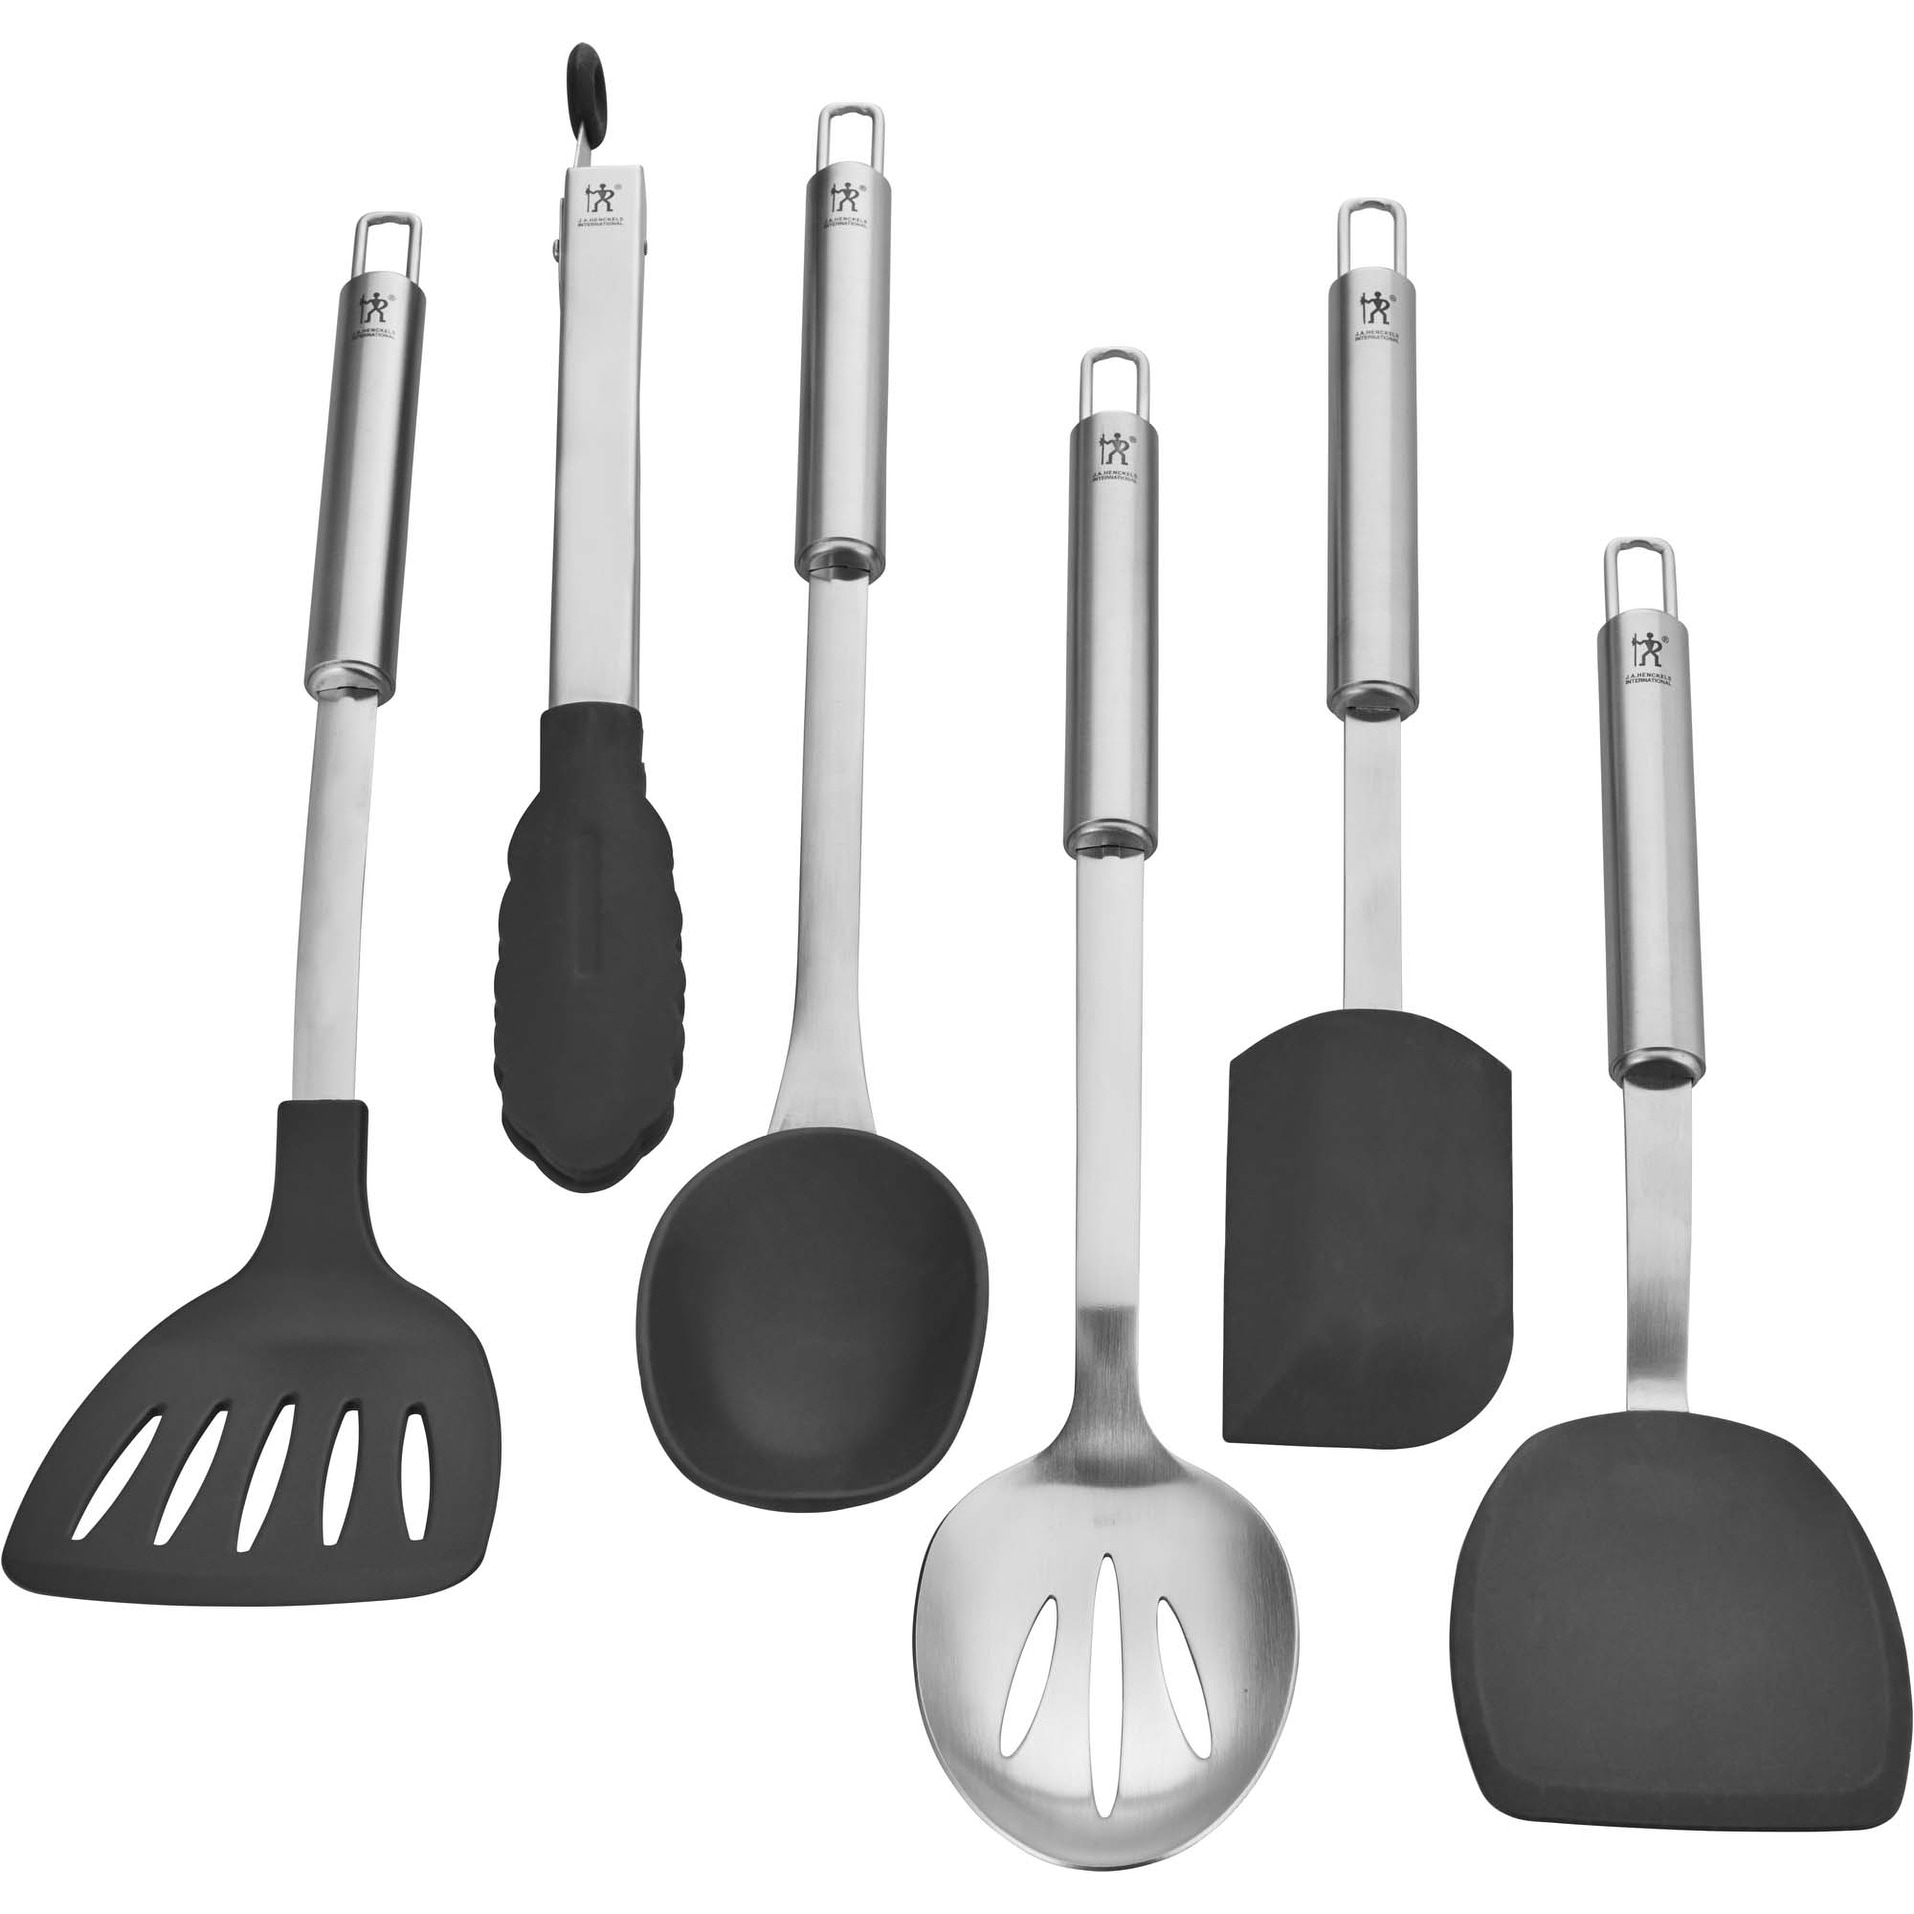 NEW Classic Farberware Cookware 17-Piece Kitchen Tool and Gadget Set